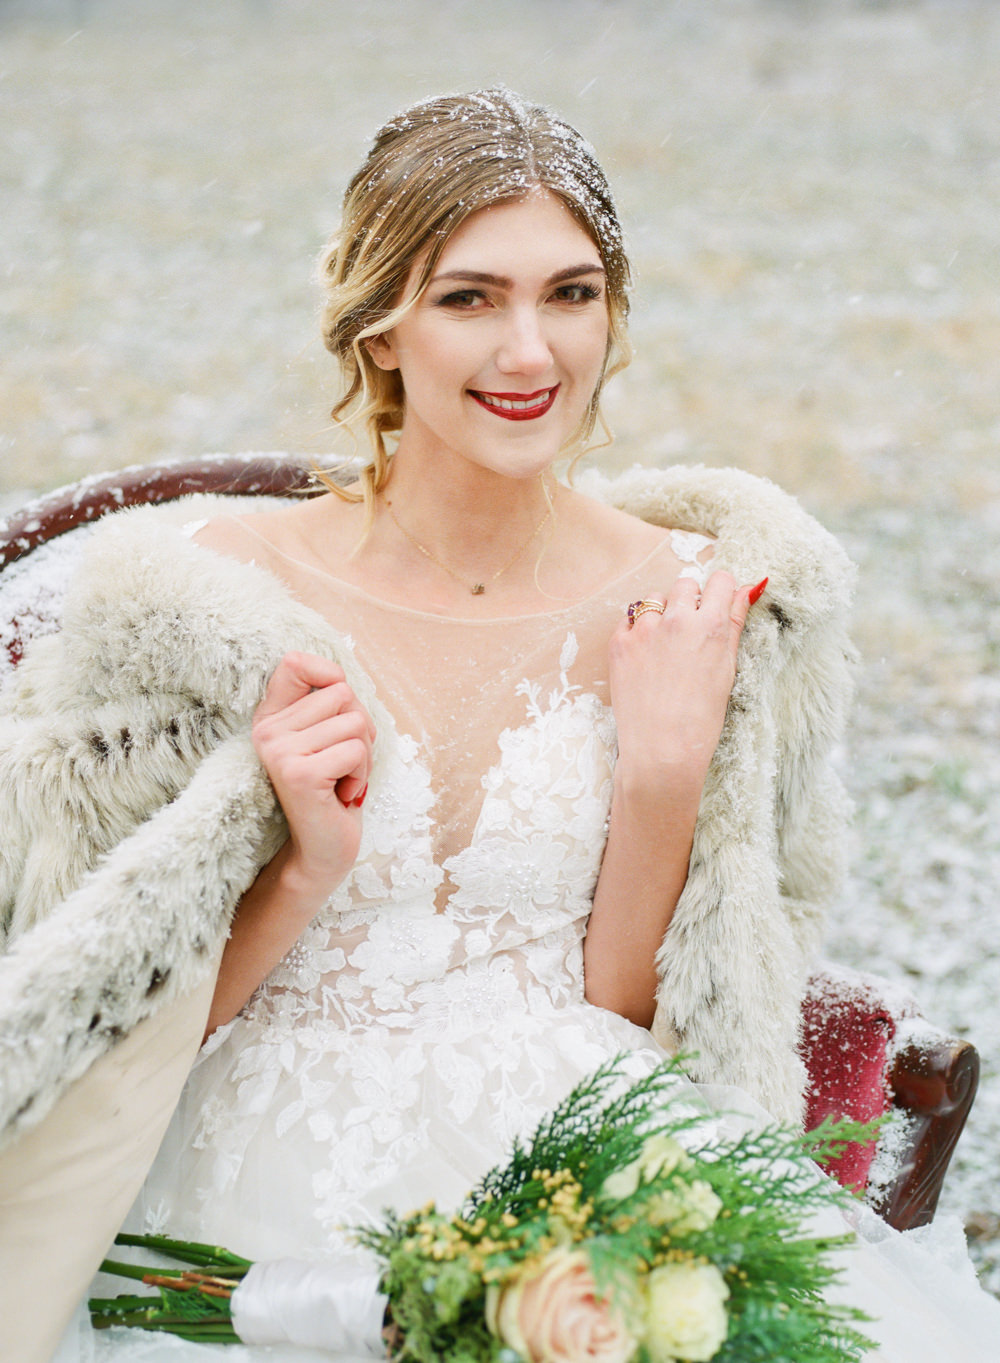 Winter wedding, Bride with fur coat on red couch in snow; St. Louis fine art film wedding photographer Erica Robnett Photography